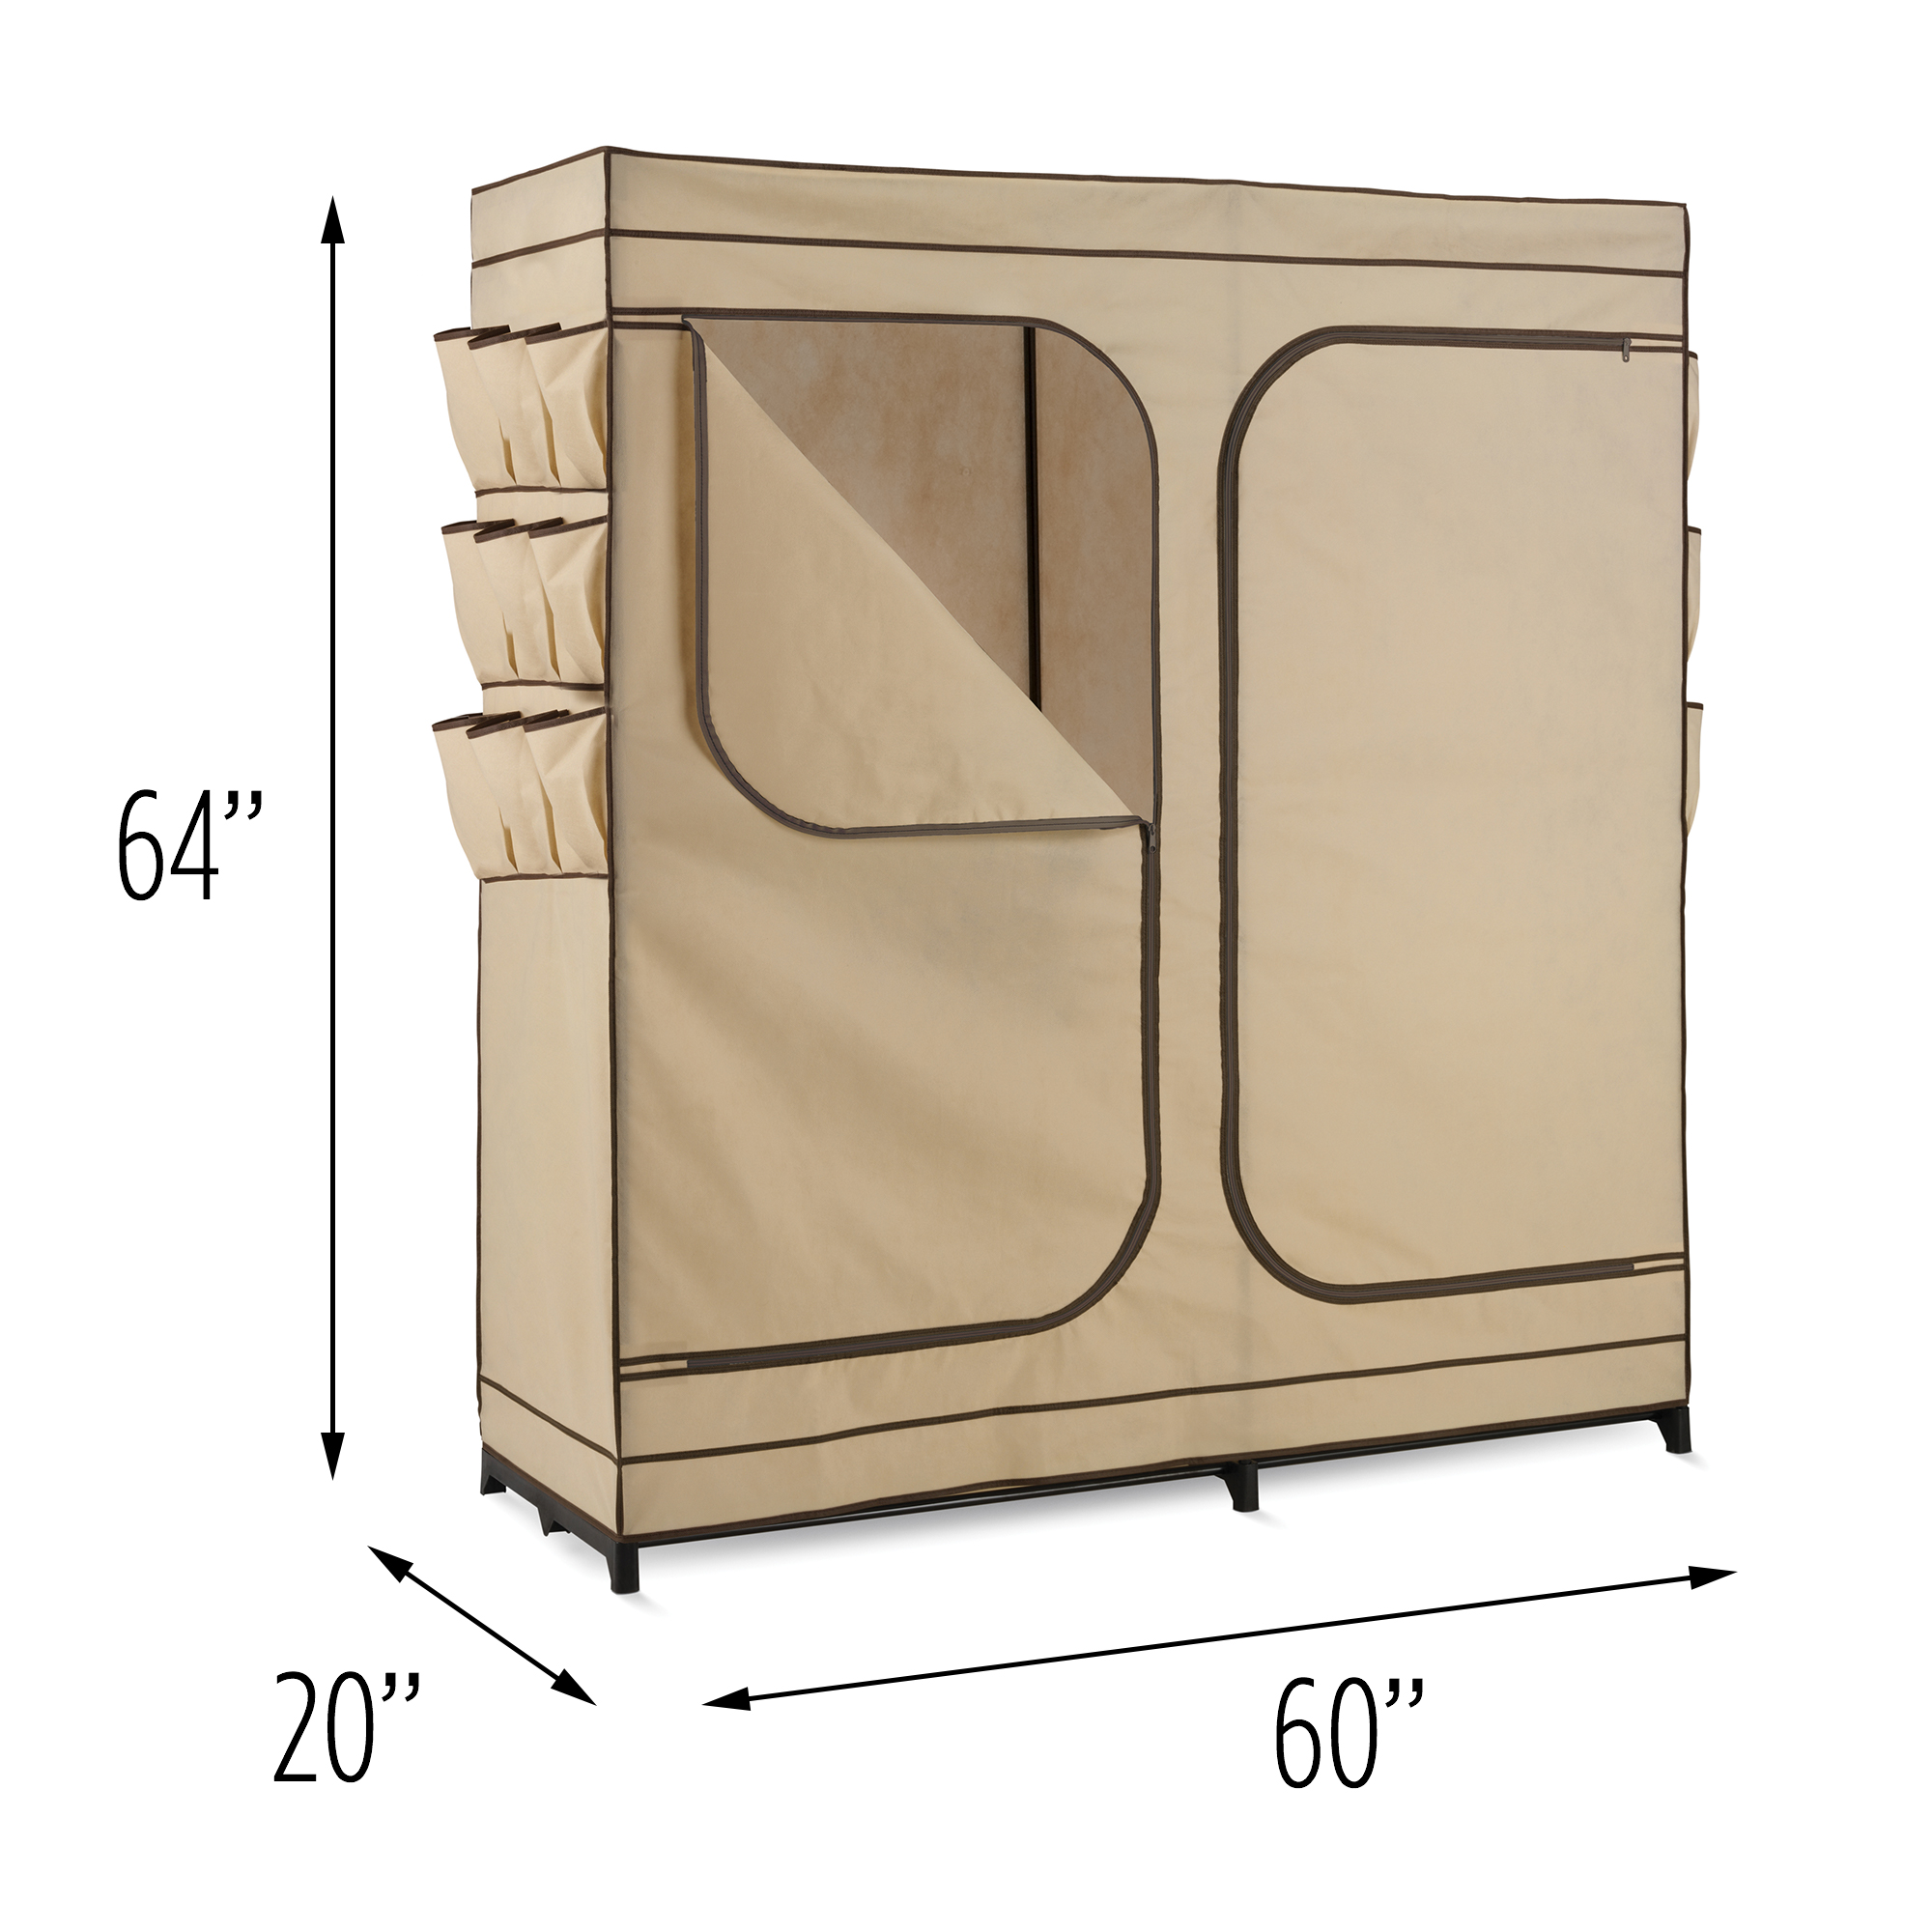 Honey Can Do Portable Closet And Clothes Rack With Cover And Double Doors, Khaki, Beige - image 3 of 9